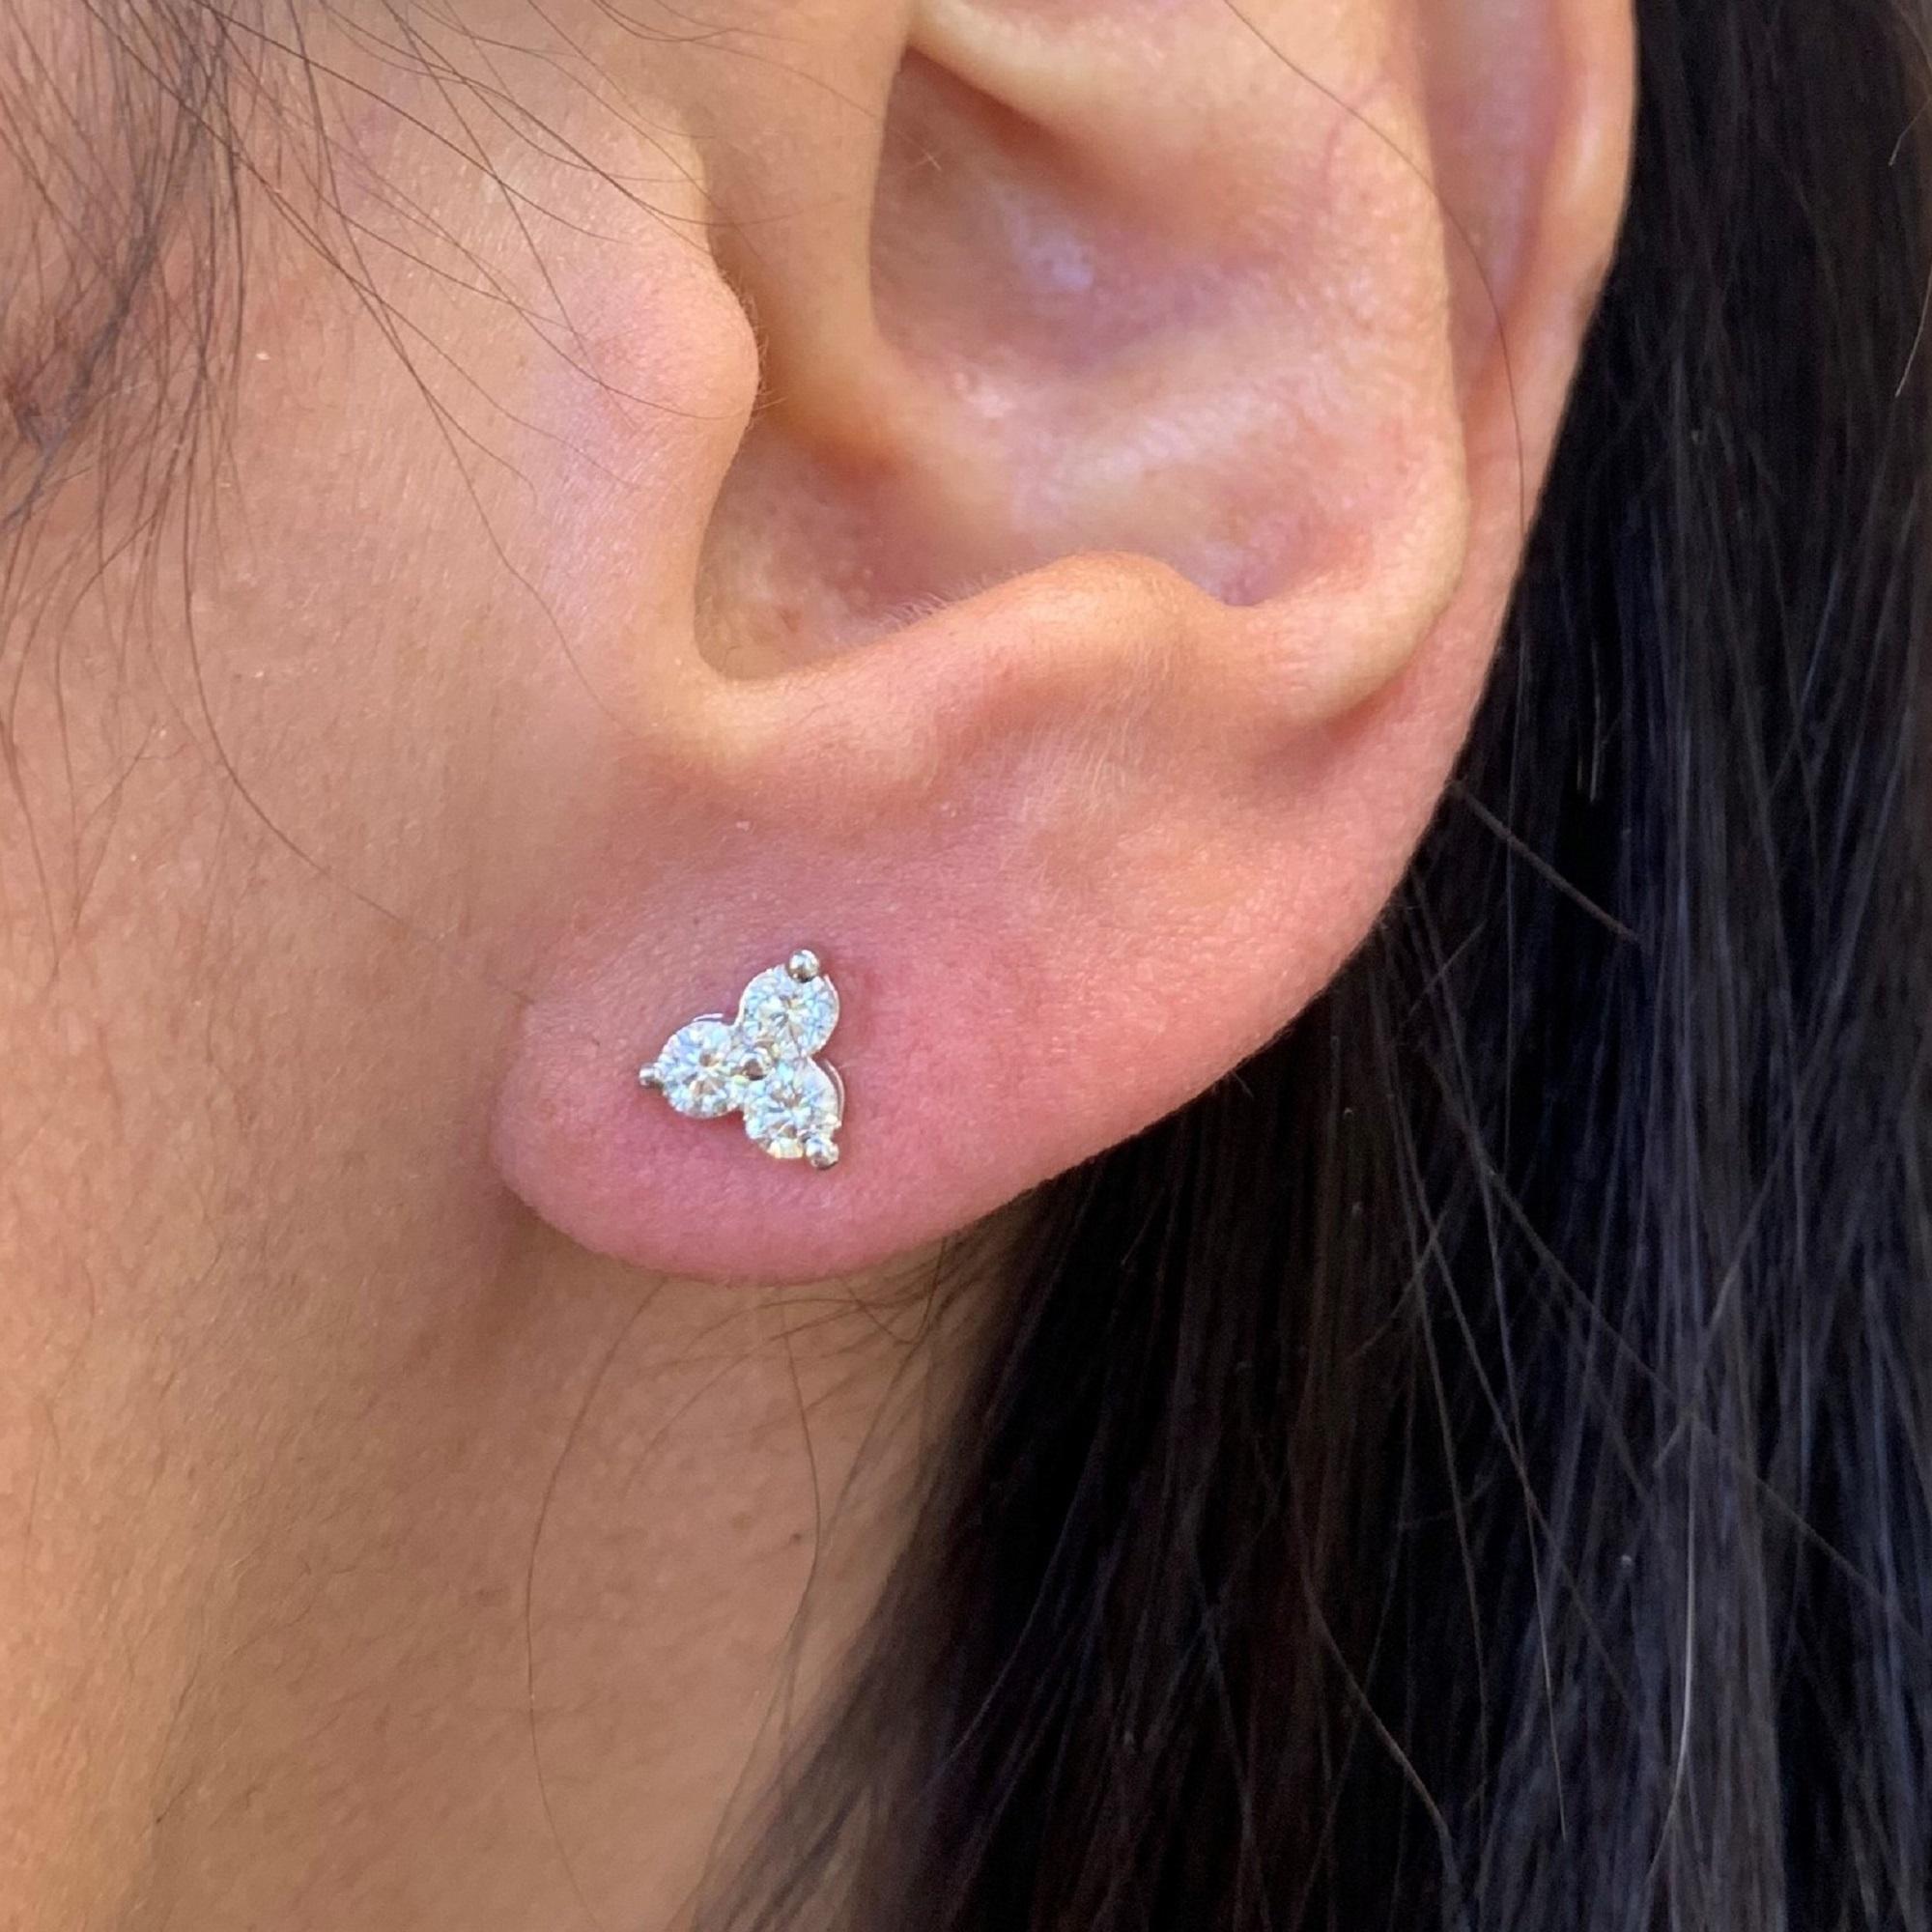 These Beautiful and Classic 3-Stone Diamond Cluster Stud Earrings are crafted of 14K White Gold and feature 6 white round Diamonds weighing 0.24cts, has butterfly push-backs for closure. Diamond Color & Clarity is GH-SI1
-14K White Gold
-0.24cts